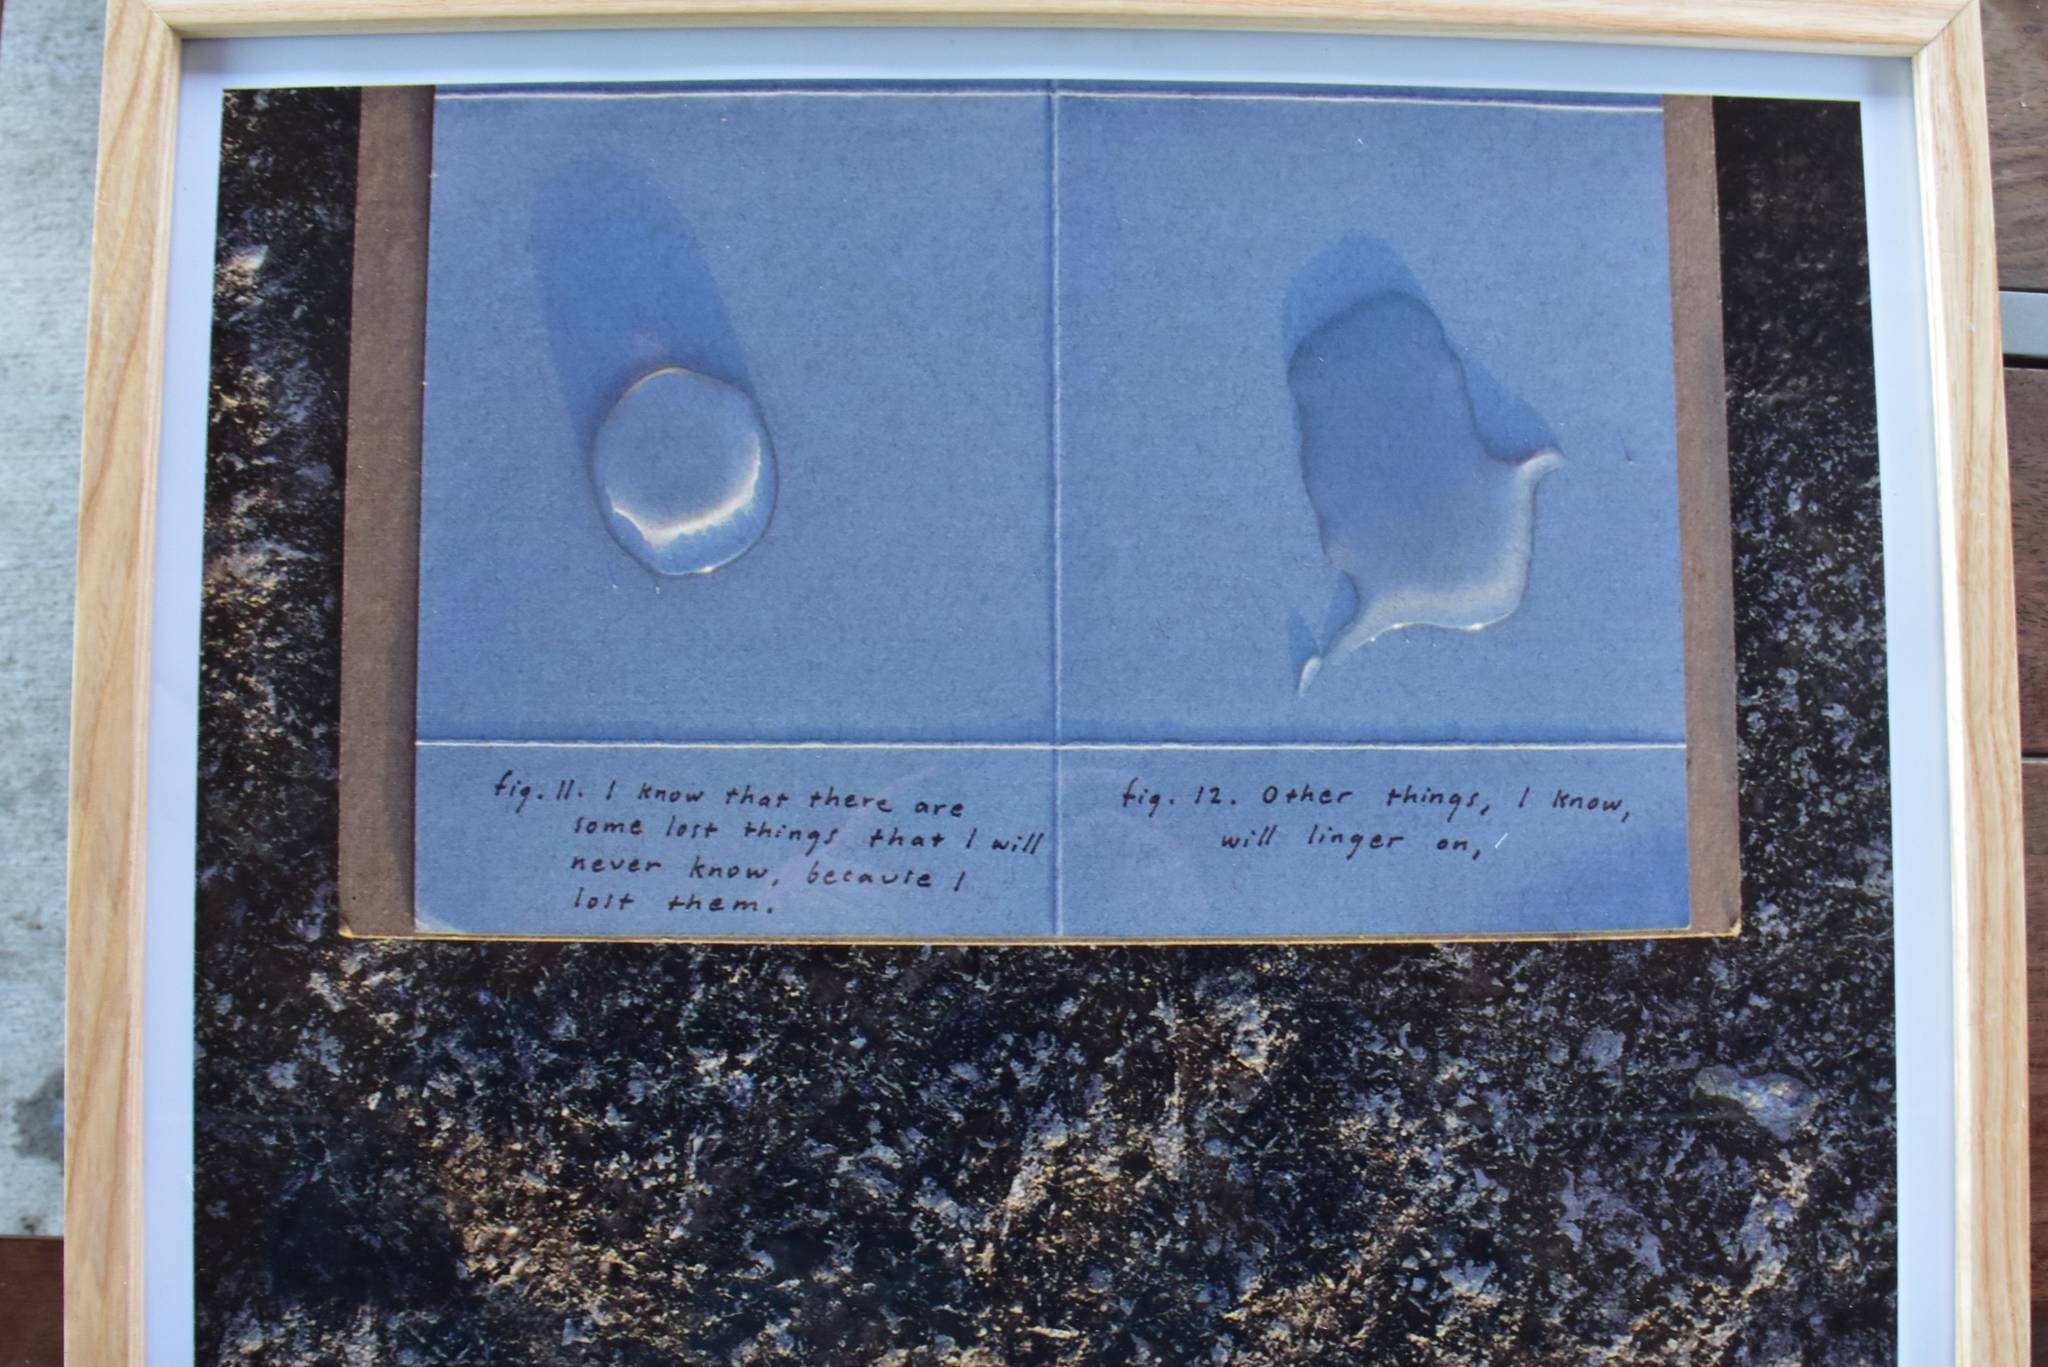 Sitka-based artist Ellie Schmidt submitted this work. On the left it reads: “Fig. 11 I know that there are some lost things that I will never know, because I lost them.” On the right, “Other things, I know, will linger on.” (Peter Segall / Juneau Empire)